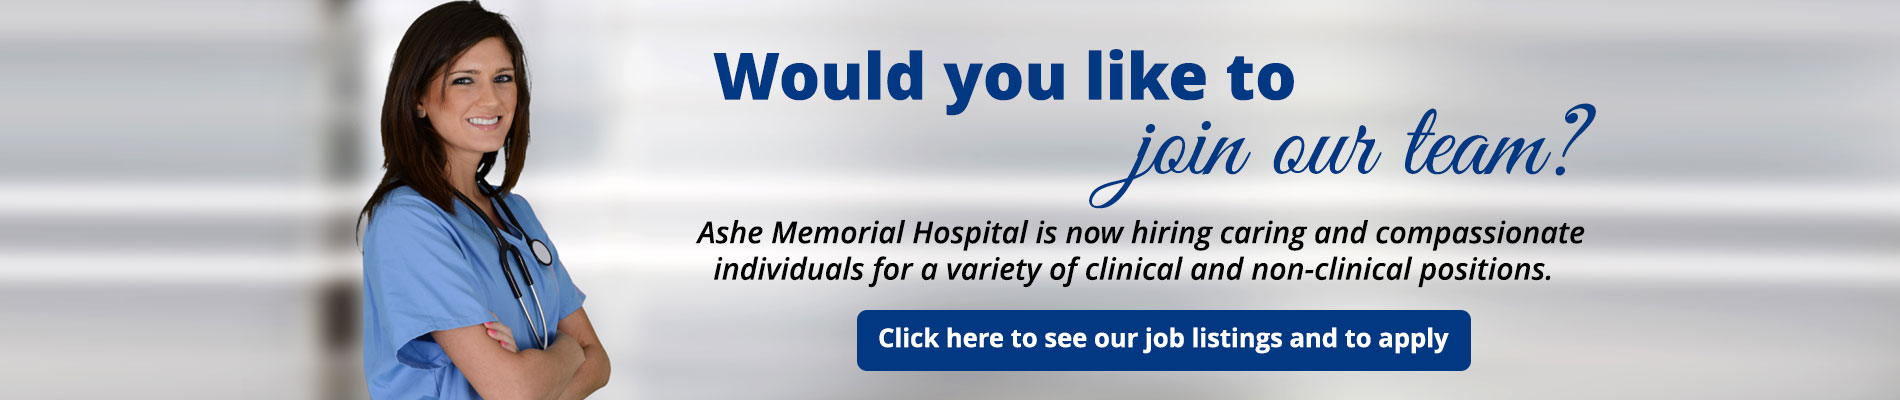 Would you like to join our team?
Ashe Memorial Hospital is now hiring caring and compassionate individuals for a variety of clinical and non-clinical positions.

(Click here to see our job listings and to apply)